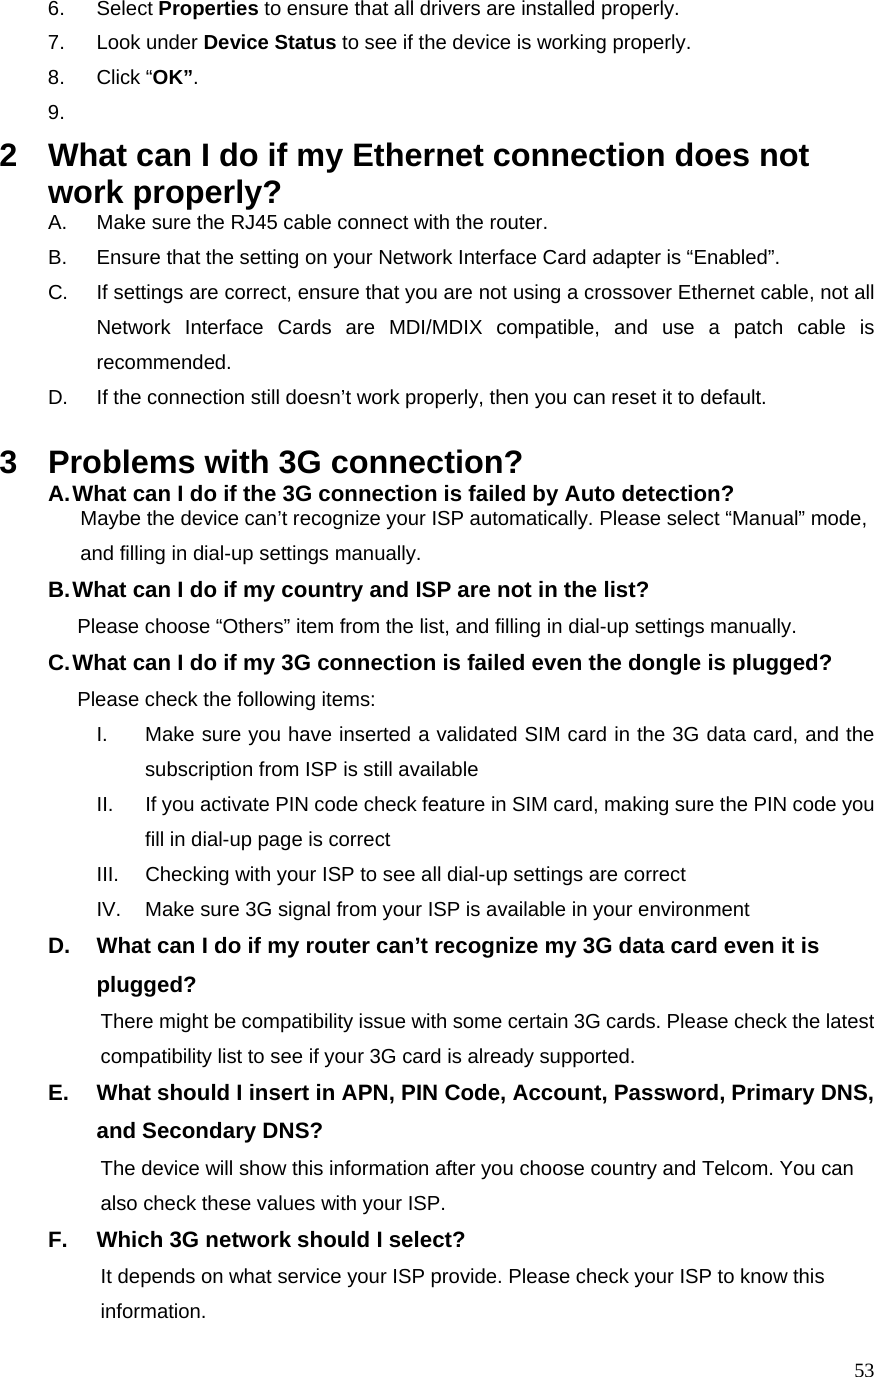  536. Select Properties to ensure that all drivers are installed properly. 7. Look under Device Status to see if the device is working properly. 8. Click “OK”. 9.  2  What can I do if my Ethernet connection does not work properly? A.  Make sure the RJ45 cable connect with the router. B.  Ensure that the setting on your Network Interface Card adapter is “Enabled”. C.  If settings are correct, ensure that you are not using a crossover Ethernet cable, not all Network Interface Cards are MDI/MDIX compatible, and use a patch cable is recommended. D.  If the connection still doesn’t work properly, then you can reset it to default.      3  Problems with 3G connection? A. What can I do if the 3G connection is failed by Auto detection?           Maybe the device can’t recognize your ISP automatically. Please select “Manual” mode,     and filling in dial-up settings manually. B. What can I do if my country and ISP are not in the list?        Please choose “Others” item from the list, and filling in dial-up settings manually. C. What can I do if my 3G connection is failed even the dongle is plugged?        Please check the following items: I.  Make sure you have inserted a validated SIM card in the 3G data card, and the subscription from ISP is still available II.  If you activate PIN code check feature in SIM card, making sure the PIN code you fill in dial-up page is correct III.  Checking with your ISP to see all dial-up settings are correct IV.  Make sure 3G signal from your ISP is available in your environment D.  What can I do if my router can’t recognize my 3G data card even it is plugged?           There might be compatibility issue with some certain 3G cards. Please check the latest     compatibility list to see if your 3G card is already supported. E.  What should I insert in APN, PIN Code, Account, Password, Primary DNS, and Secondary DNS?                     The device will show this information after you choose country and Telcom. You can       also check these values with your ISP. F.  Which 3G network should I select?           It depends on what service your ISP provide. Please check your ISP to know this information. 